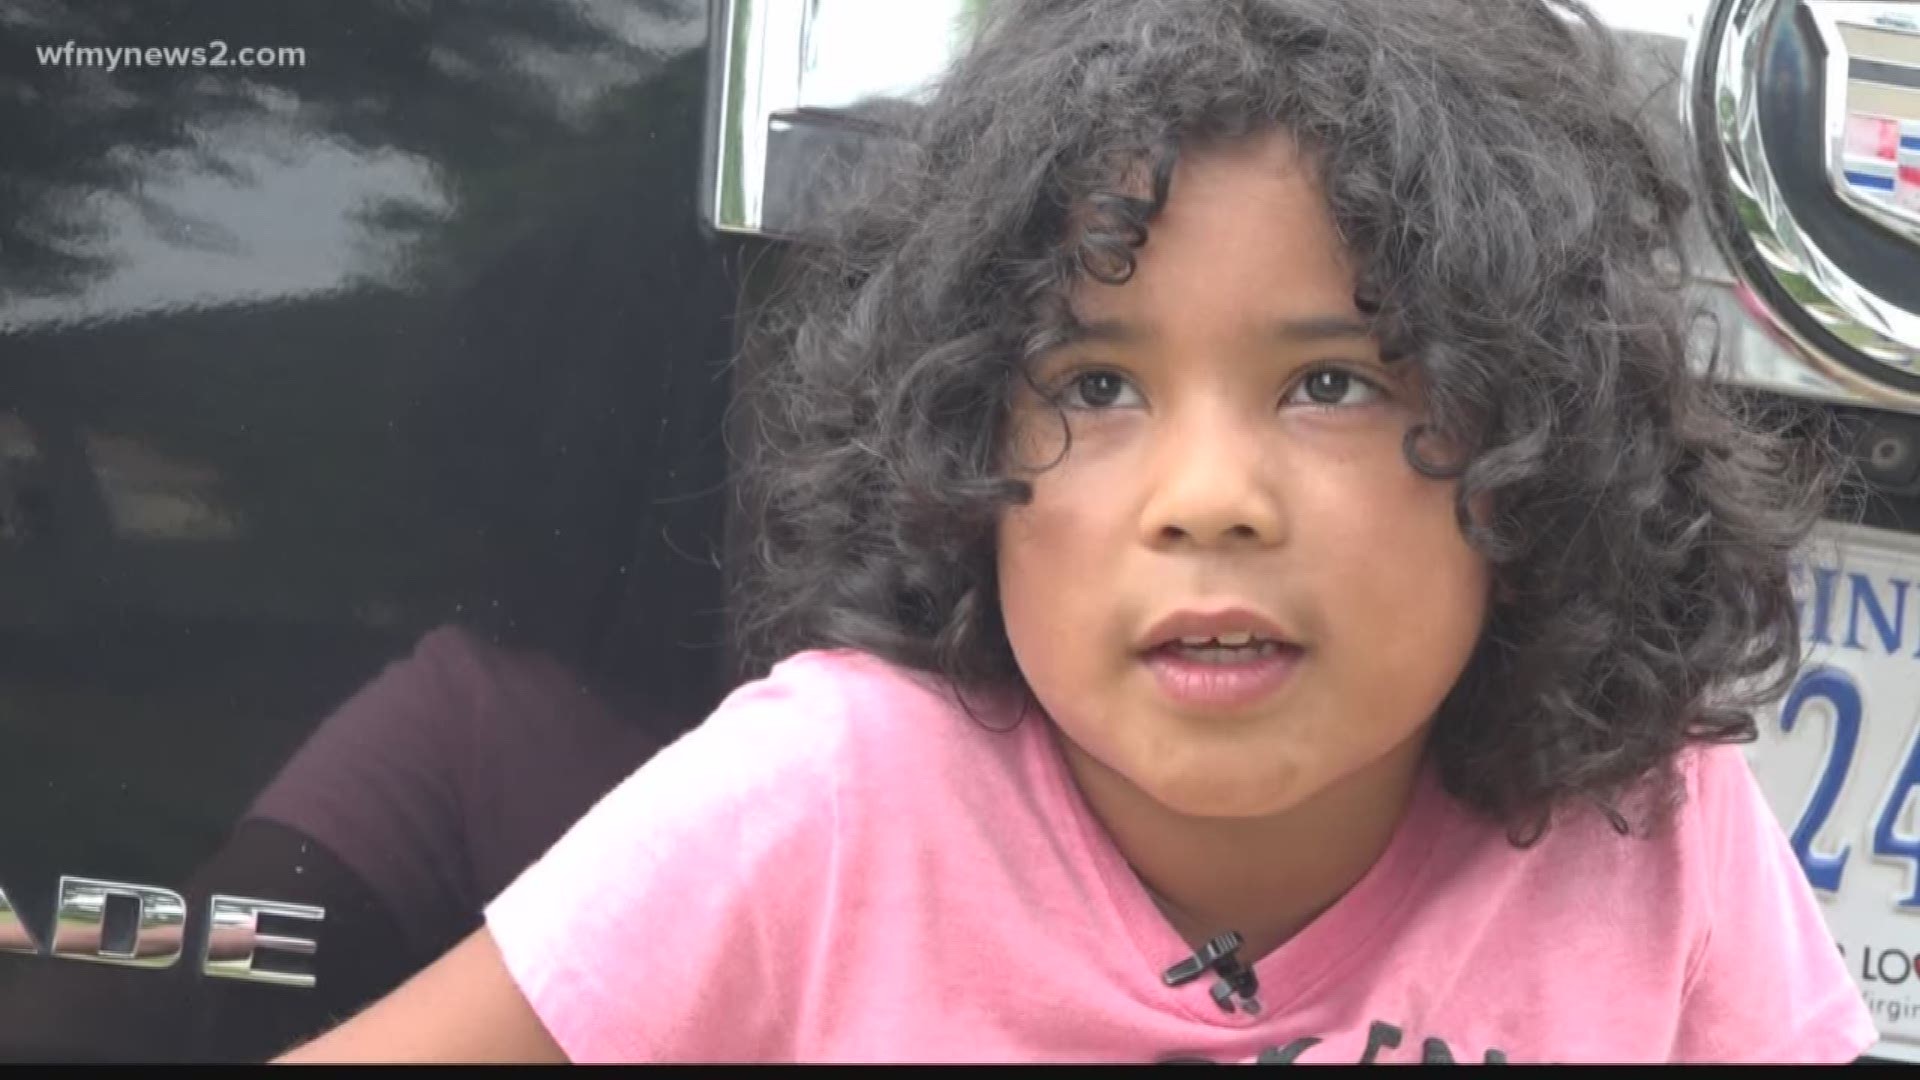 Officers say the child was hit in the head by a "falling projectile." The 'projectile' which was identified as a bullet, fell through a canopy covering a backyard swimming pool, where the 8-year-old was playing.